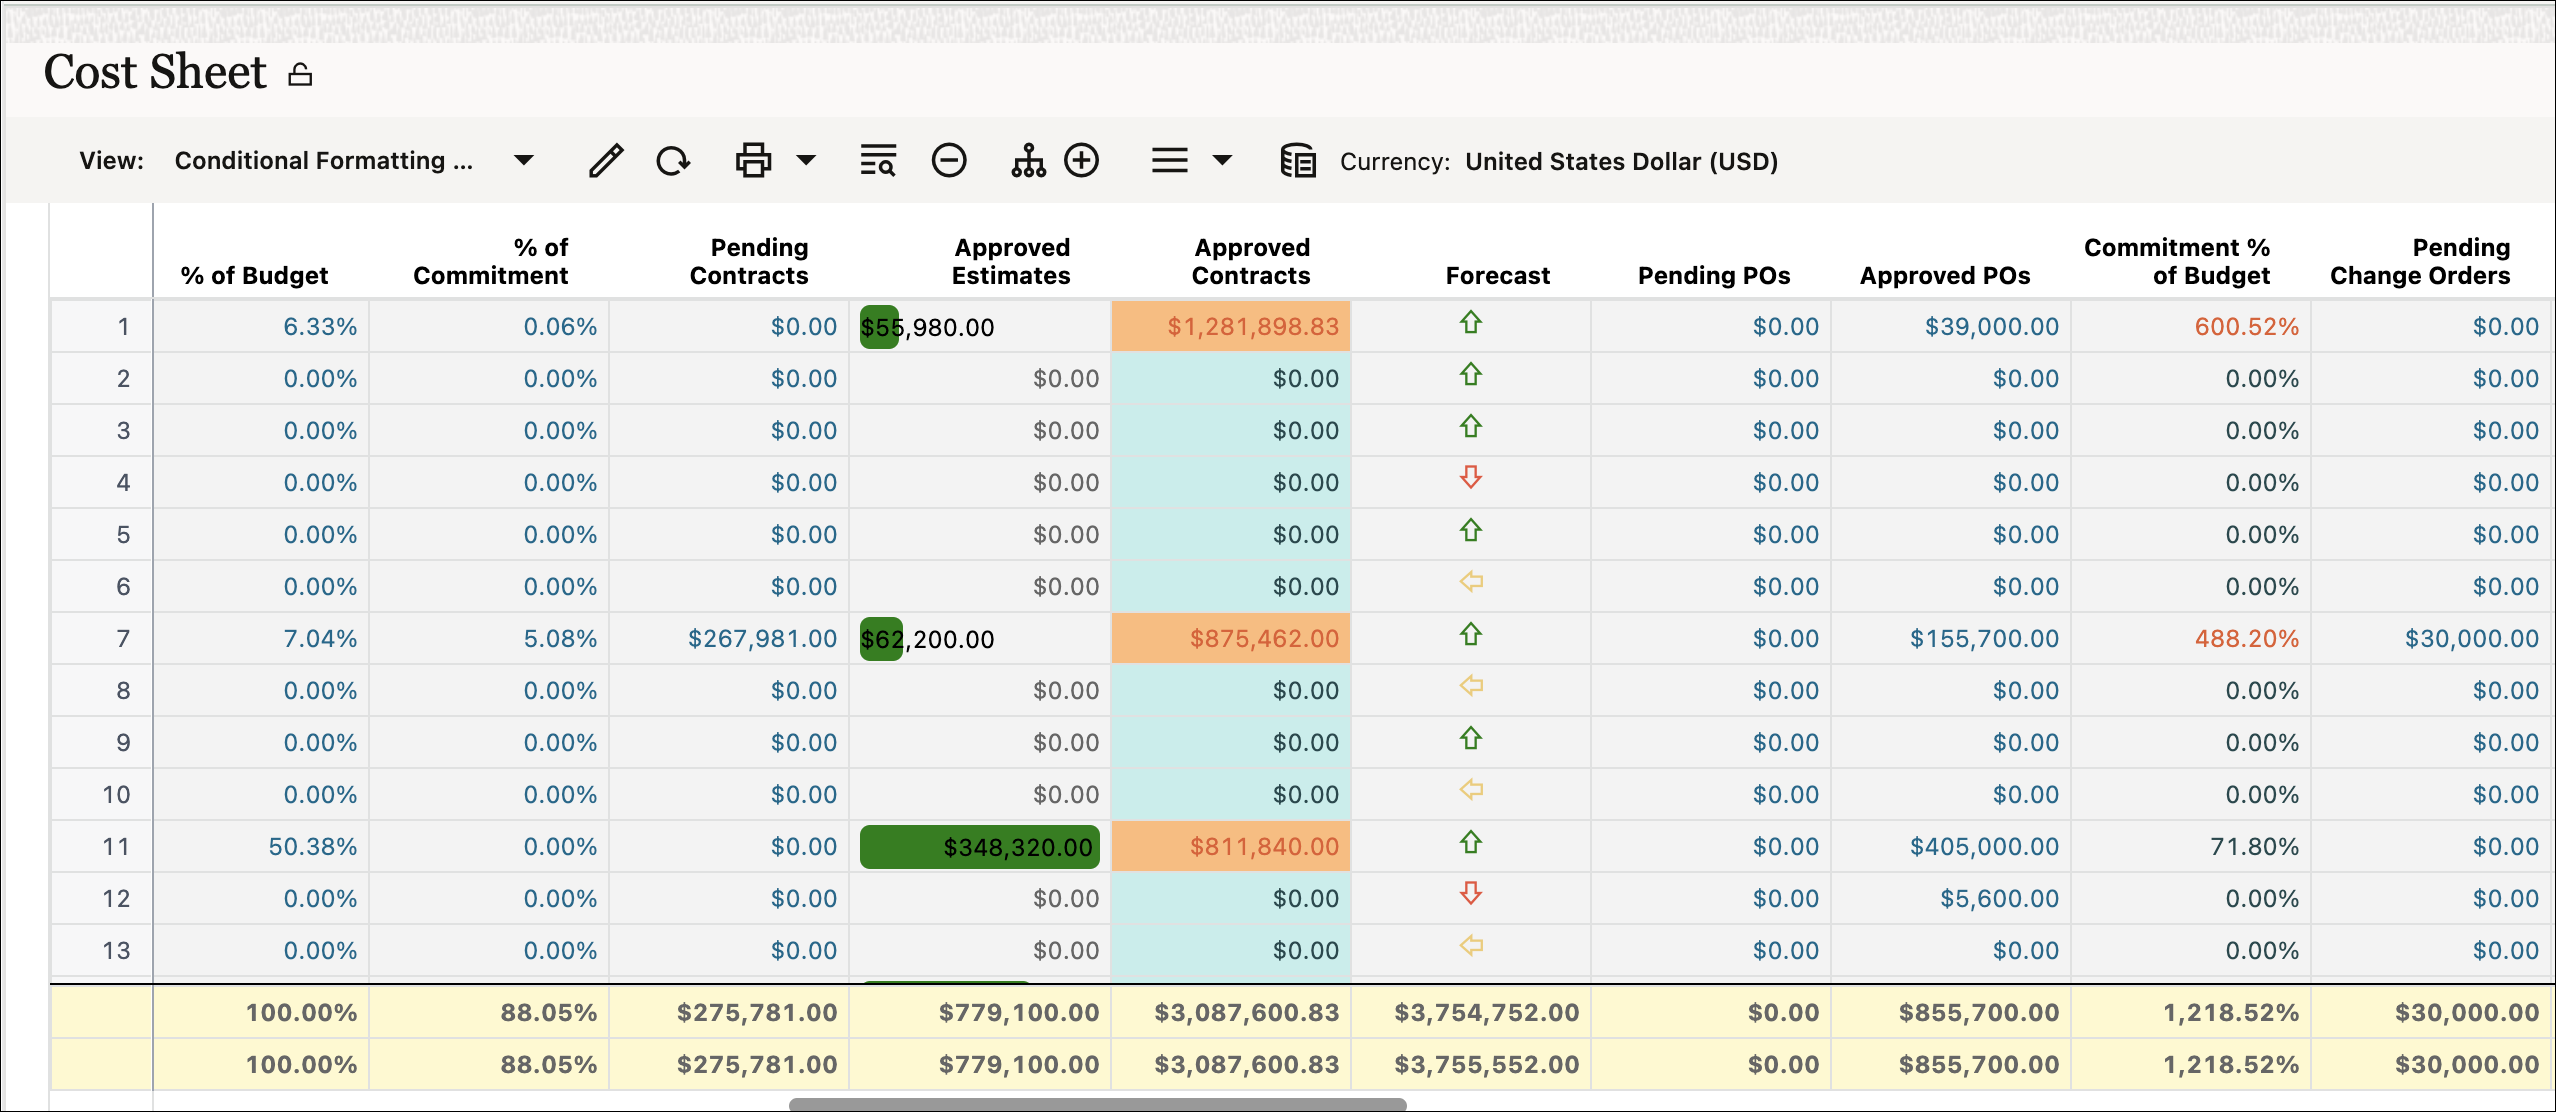 Screen image of a cost sheet, with data bars in the Approved Estimates field, cell background and text colors in the Approved Contracts field, and arrows with colors and directions in the Forecast column.